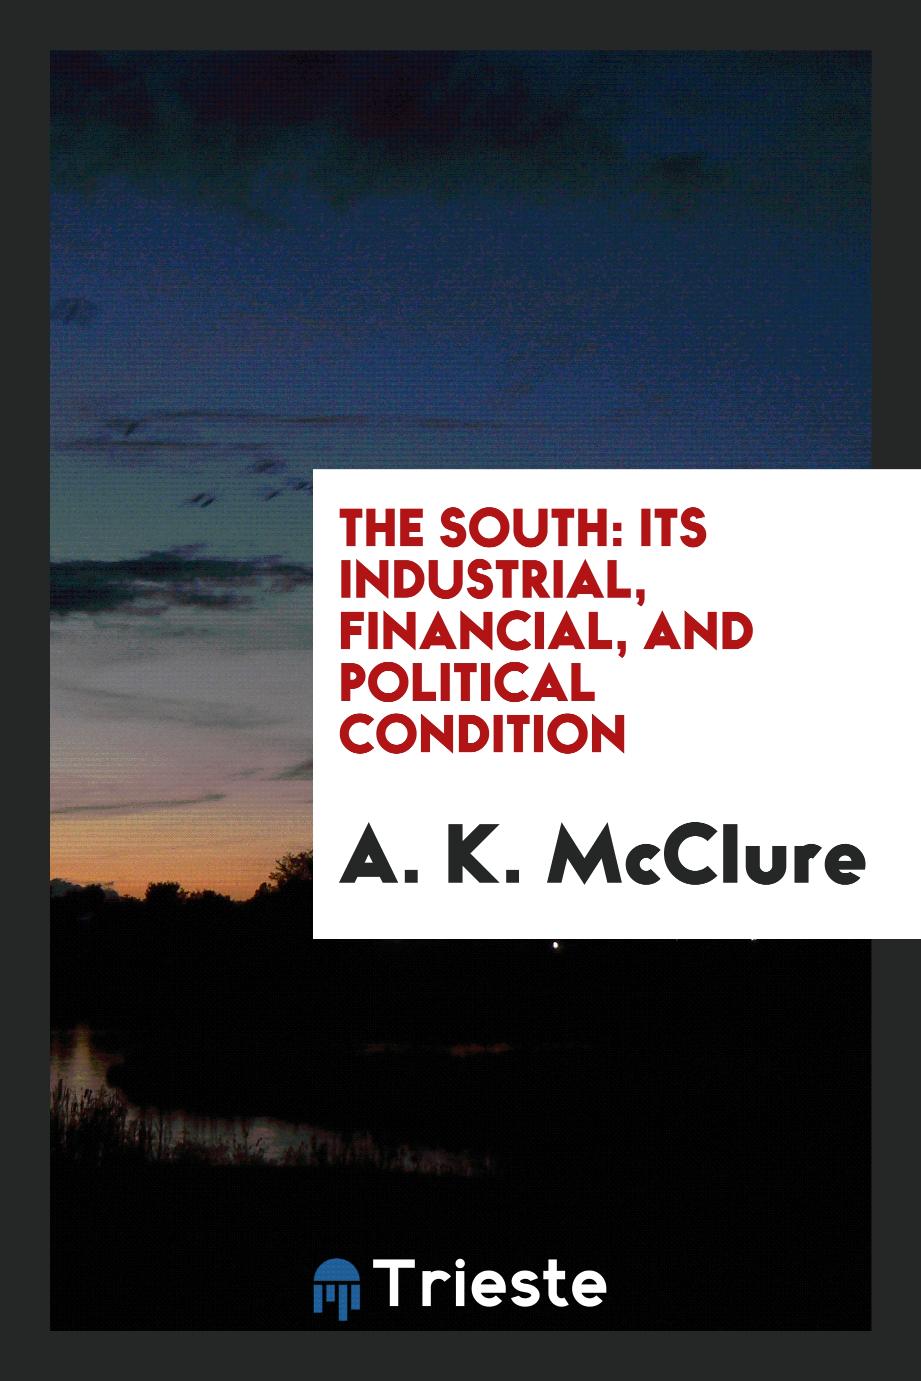 The South: its industrial, financial, and political condition